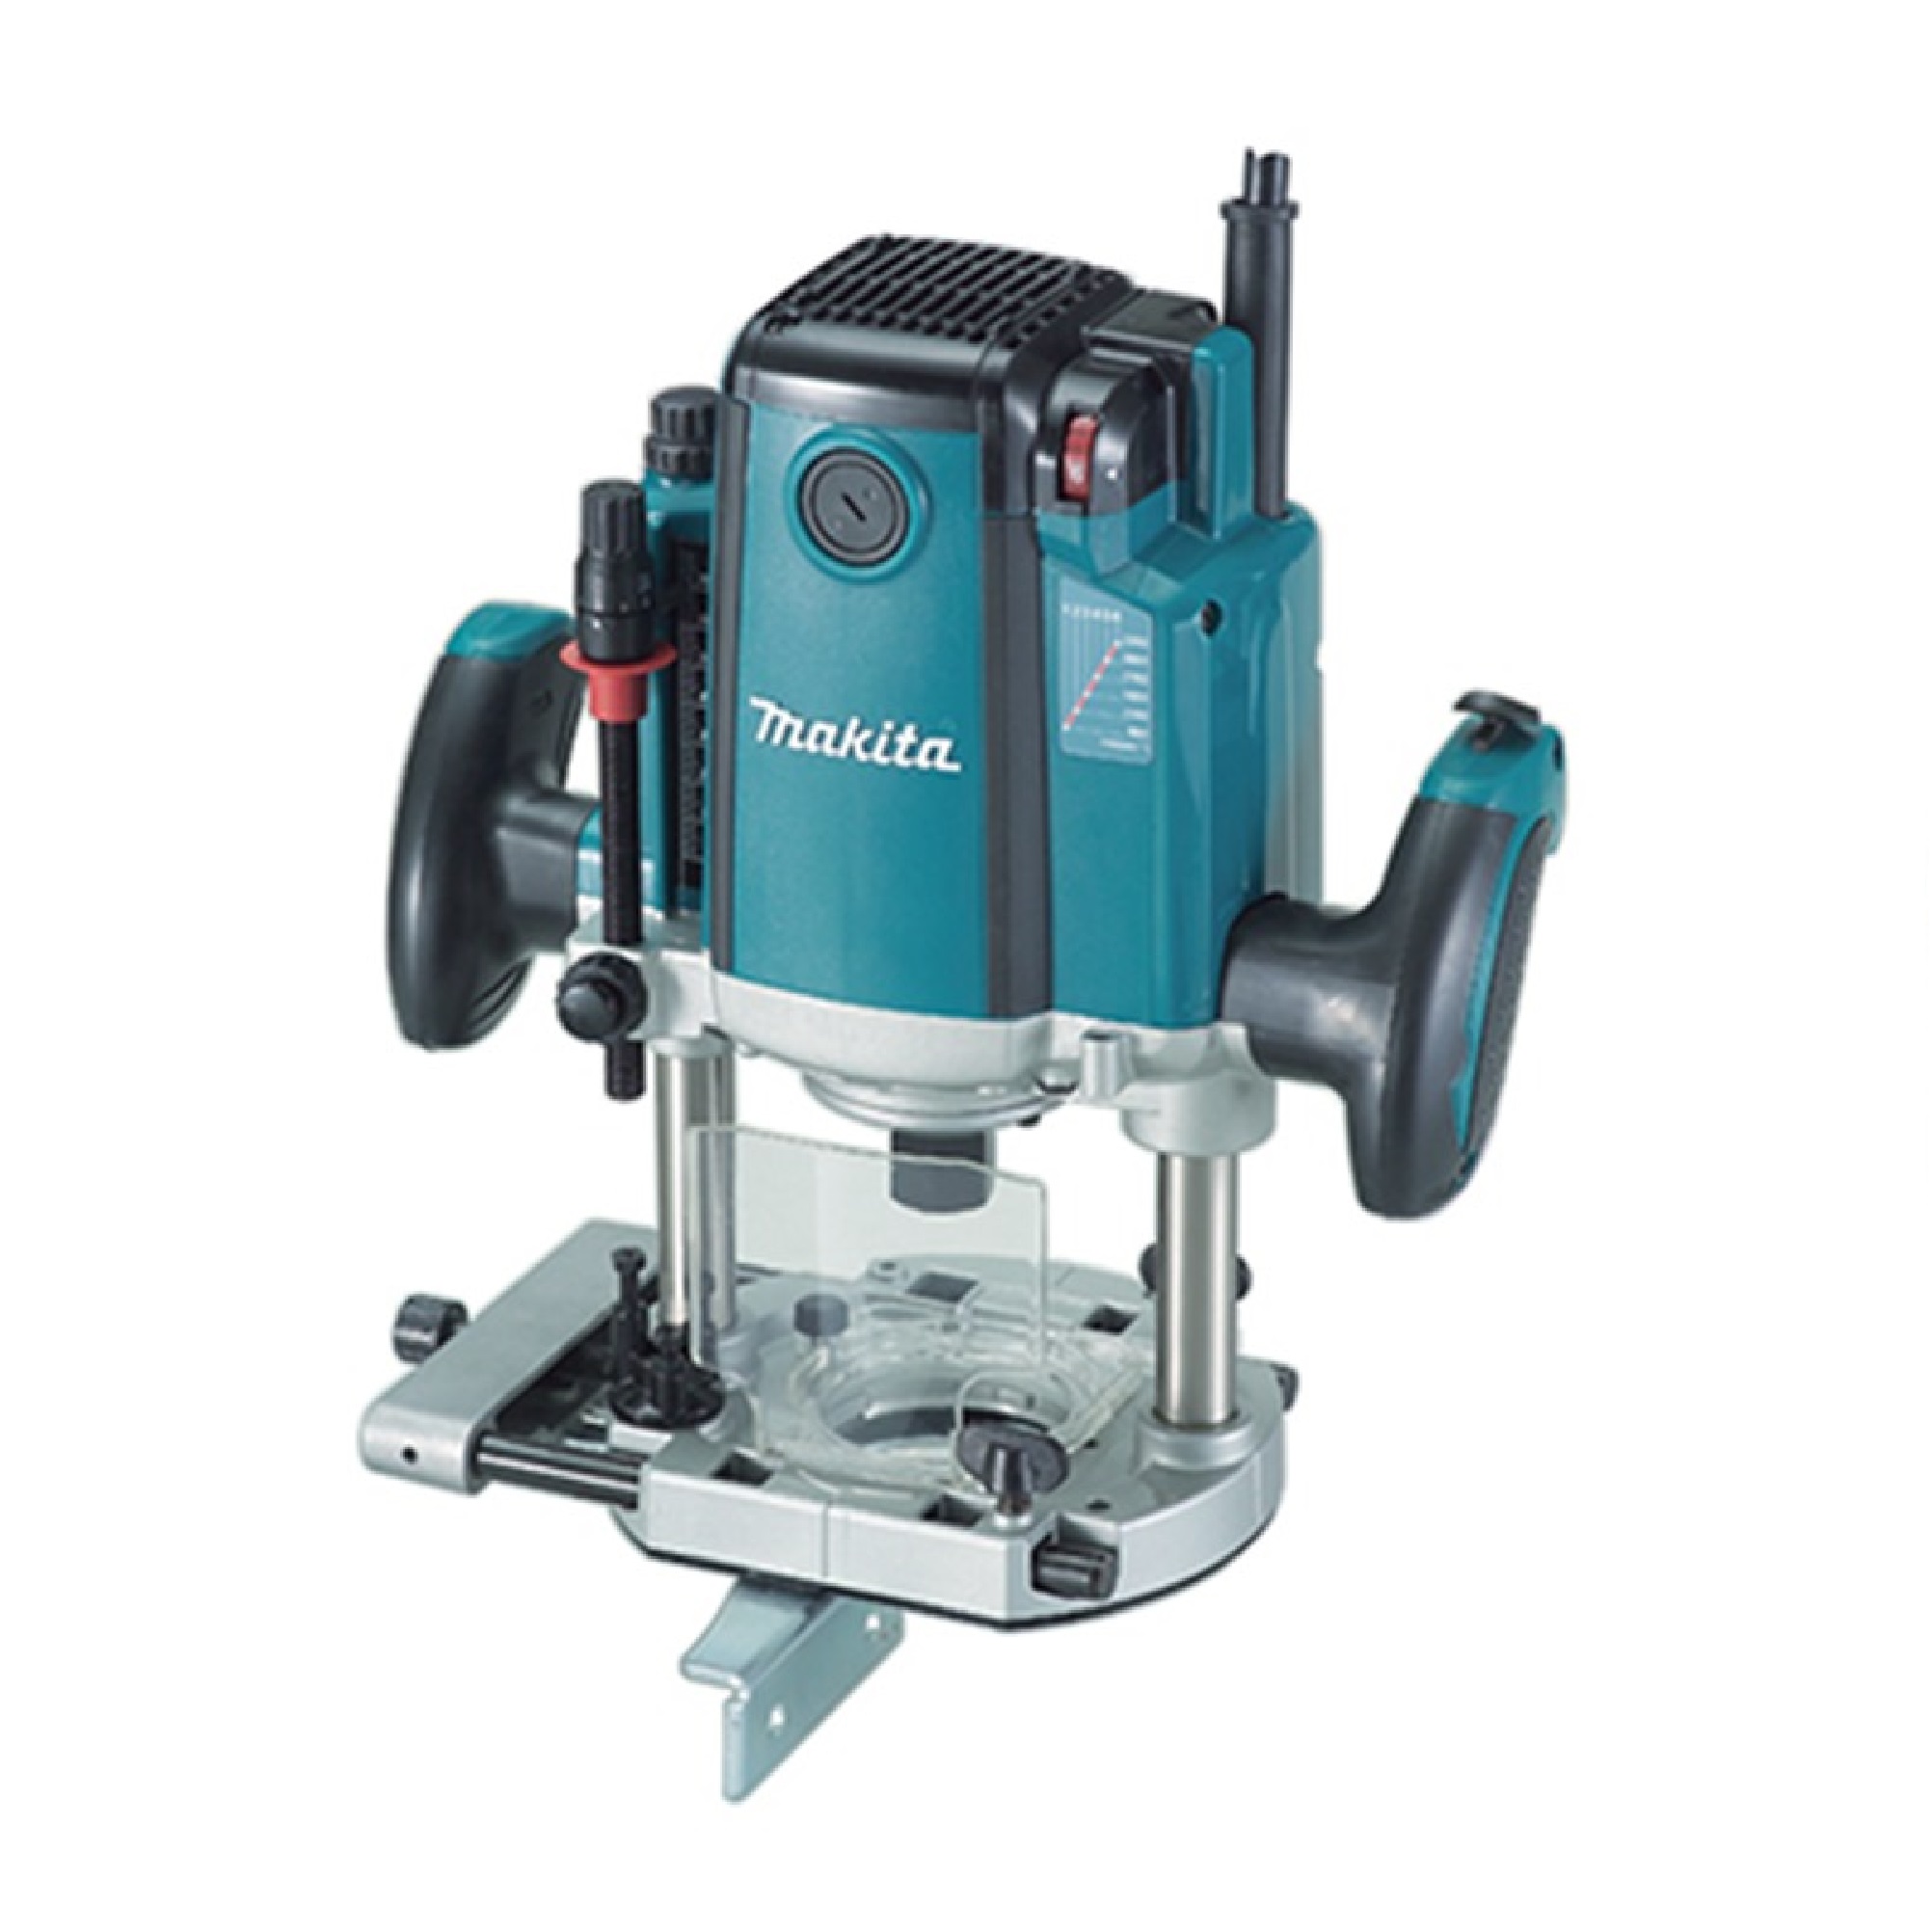 Makita RP2300FC 12MM (1/2") ROUTER 2300W